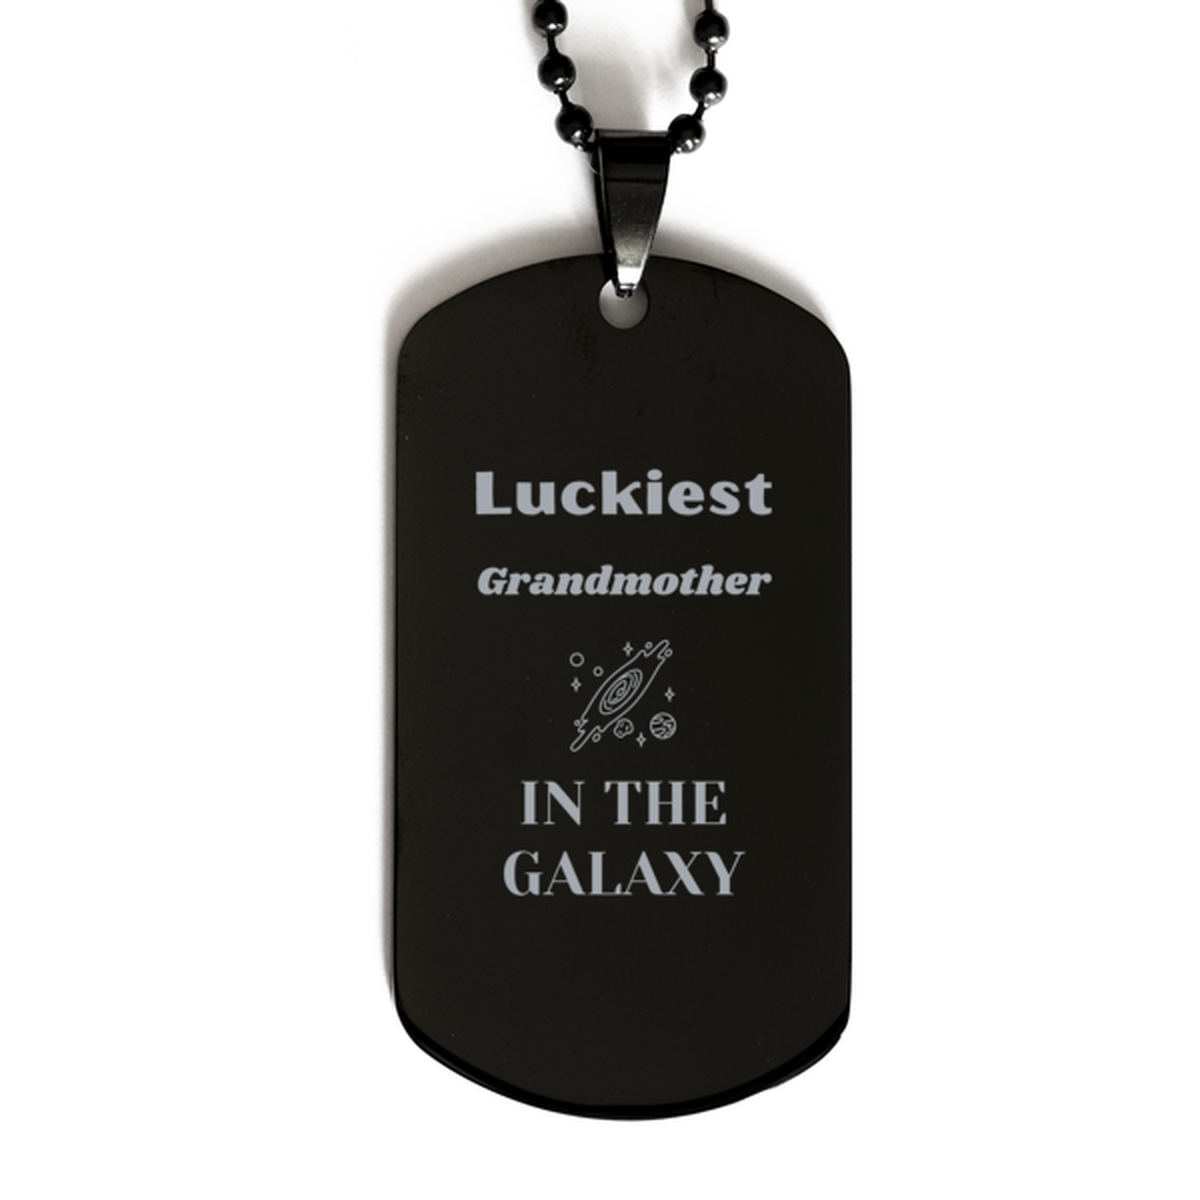 Luckiest Grandmother in the Galaxy, To My Grandmother Engraved Gifts, Christmas Grandmother Black Dog Tag Gifts, X-mas Birthday Unique Gifts For Grandmother Men Women